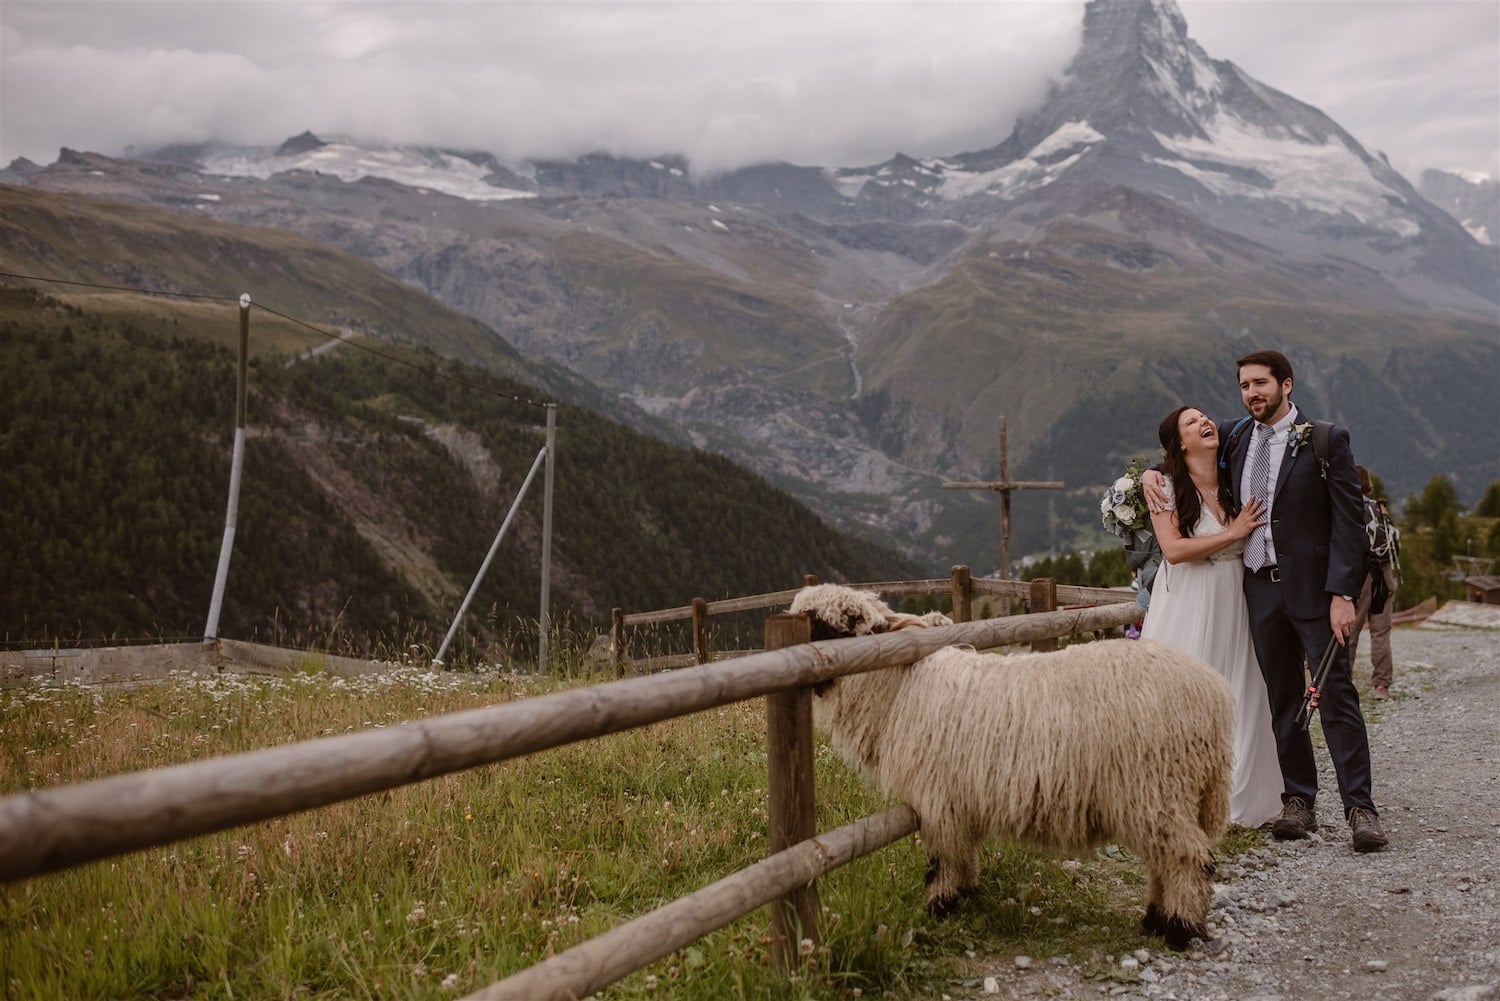 Lovers laughing and looking forward to getting married in front of the Matterhorn